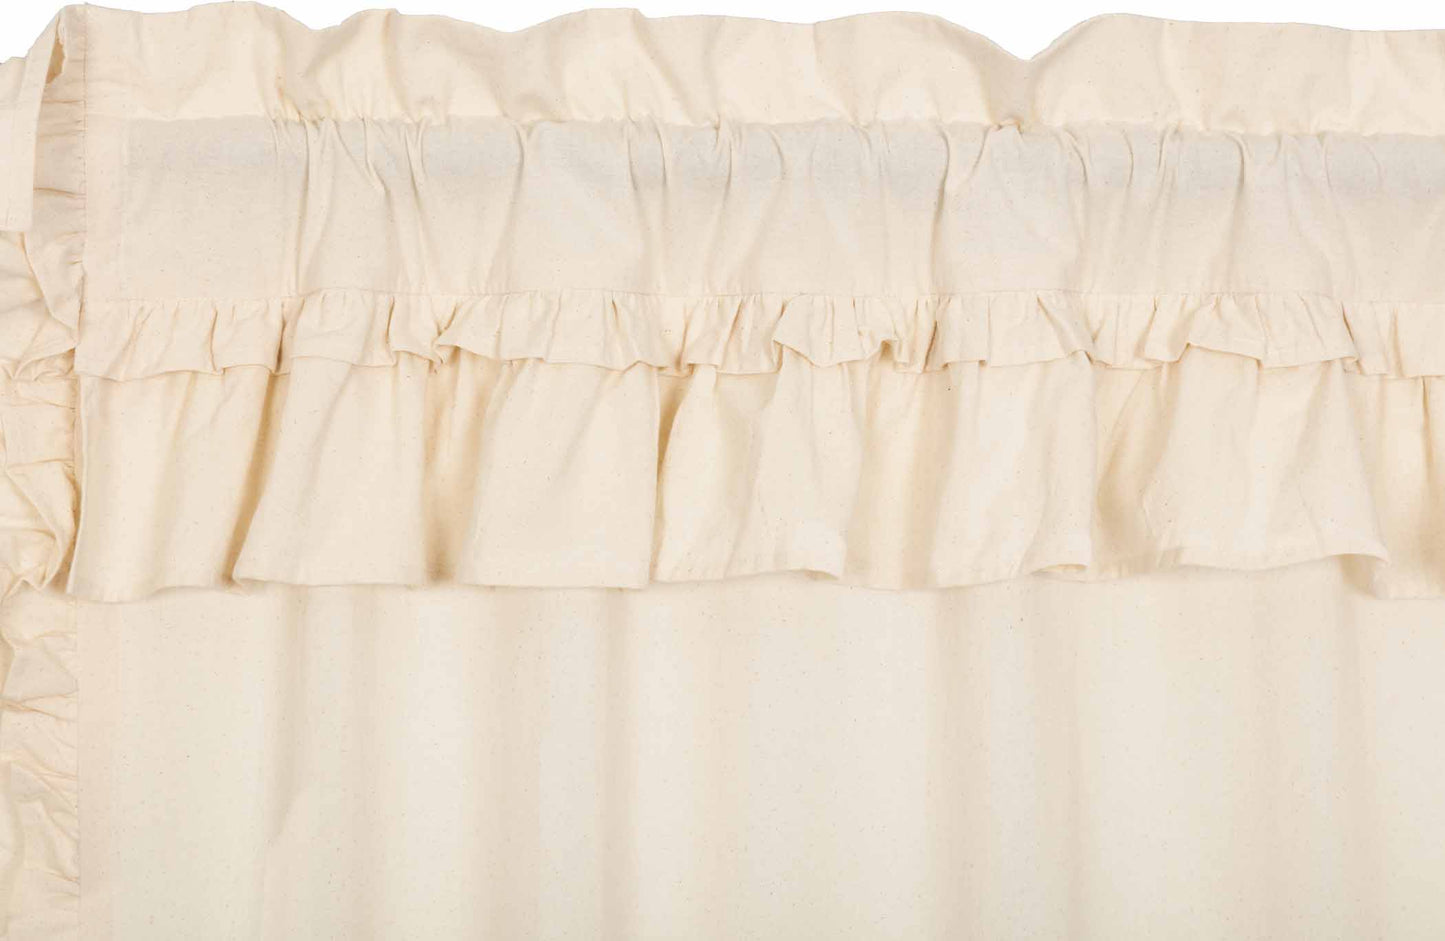 51378-Muslin-Ruffled-Unbleached-Natural-Swag-Set-of-2-36x36x16-image-7